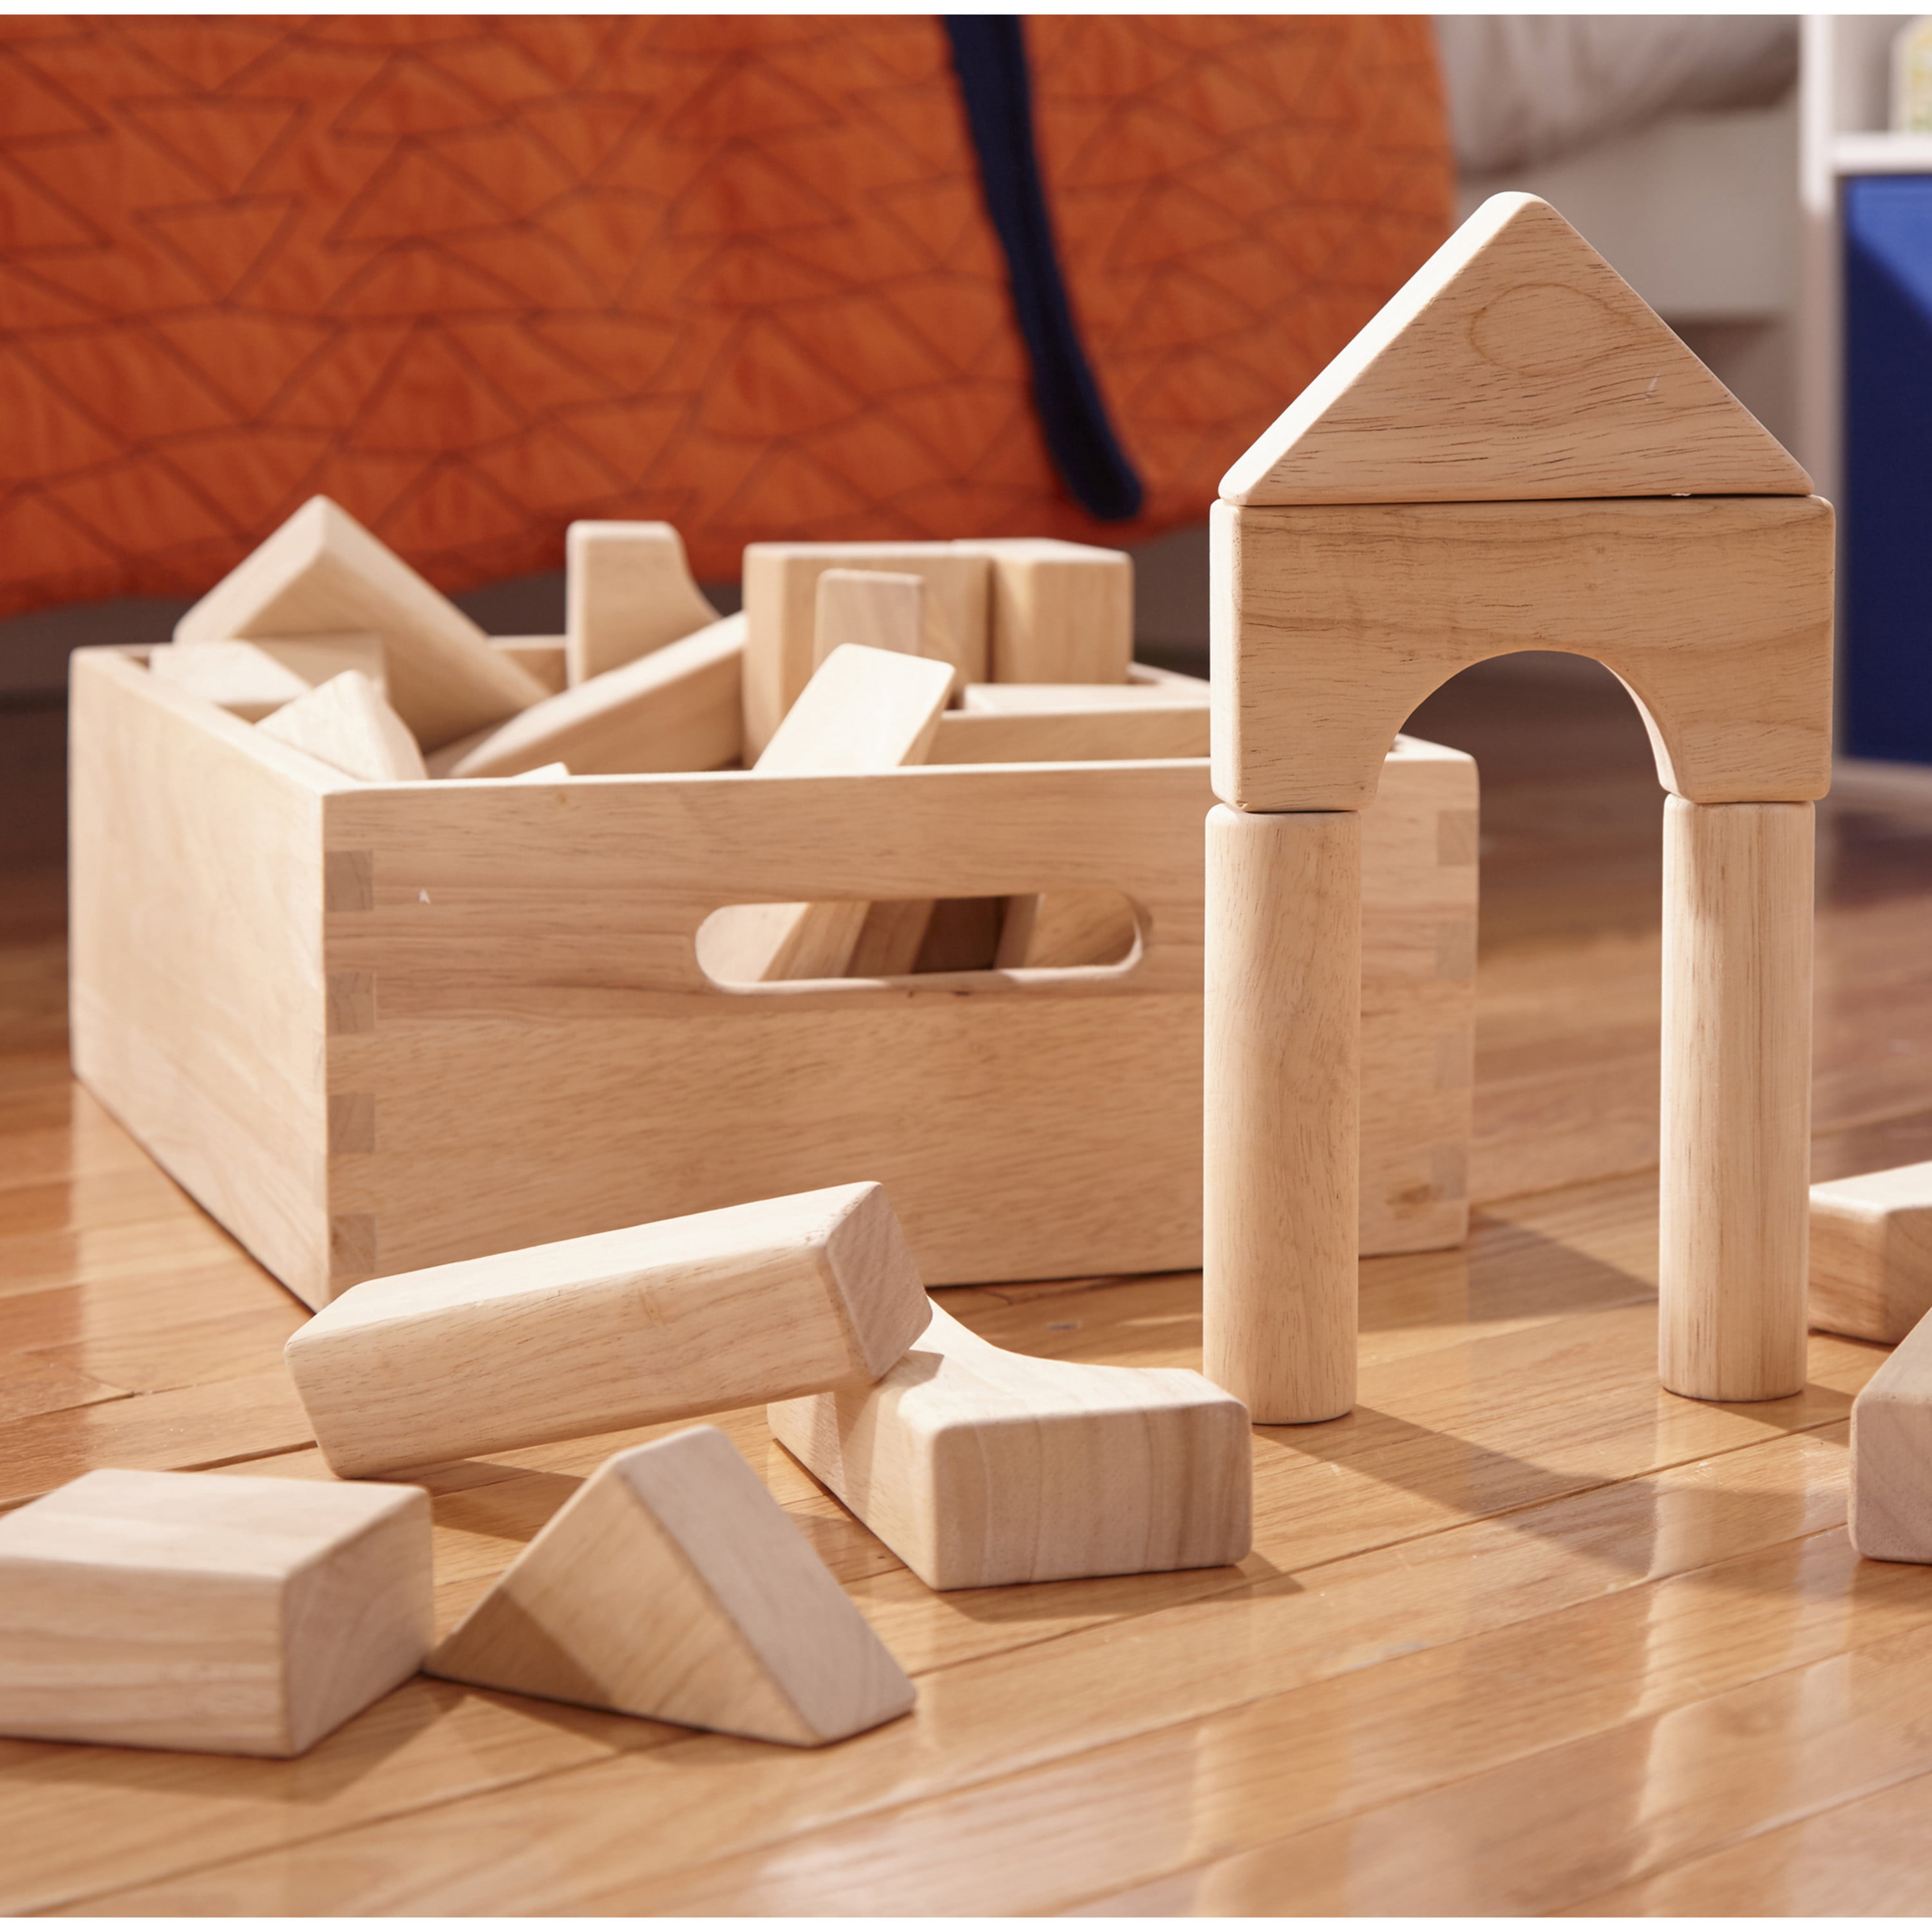 100-piece Natural Wood Building Blocks Set with Canvas Carry Bag 